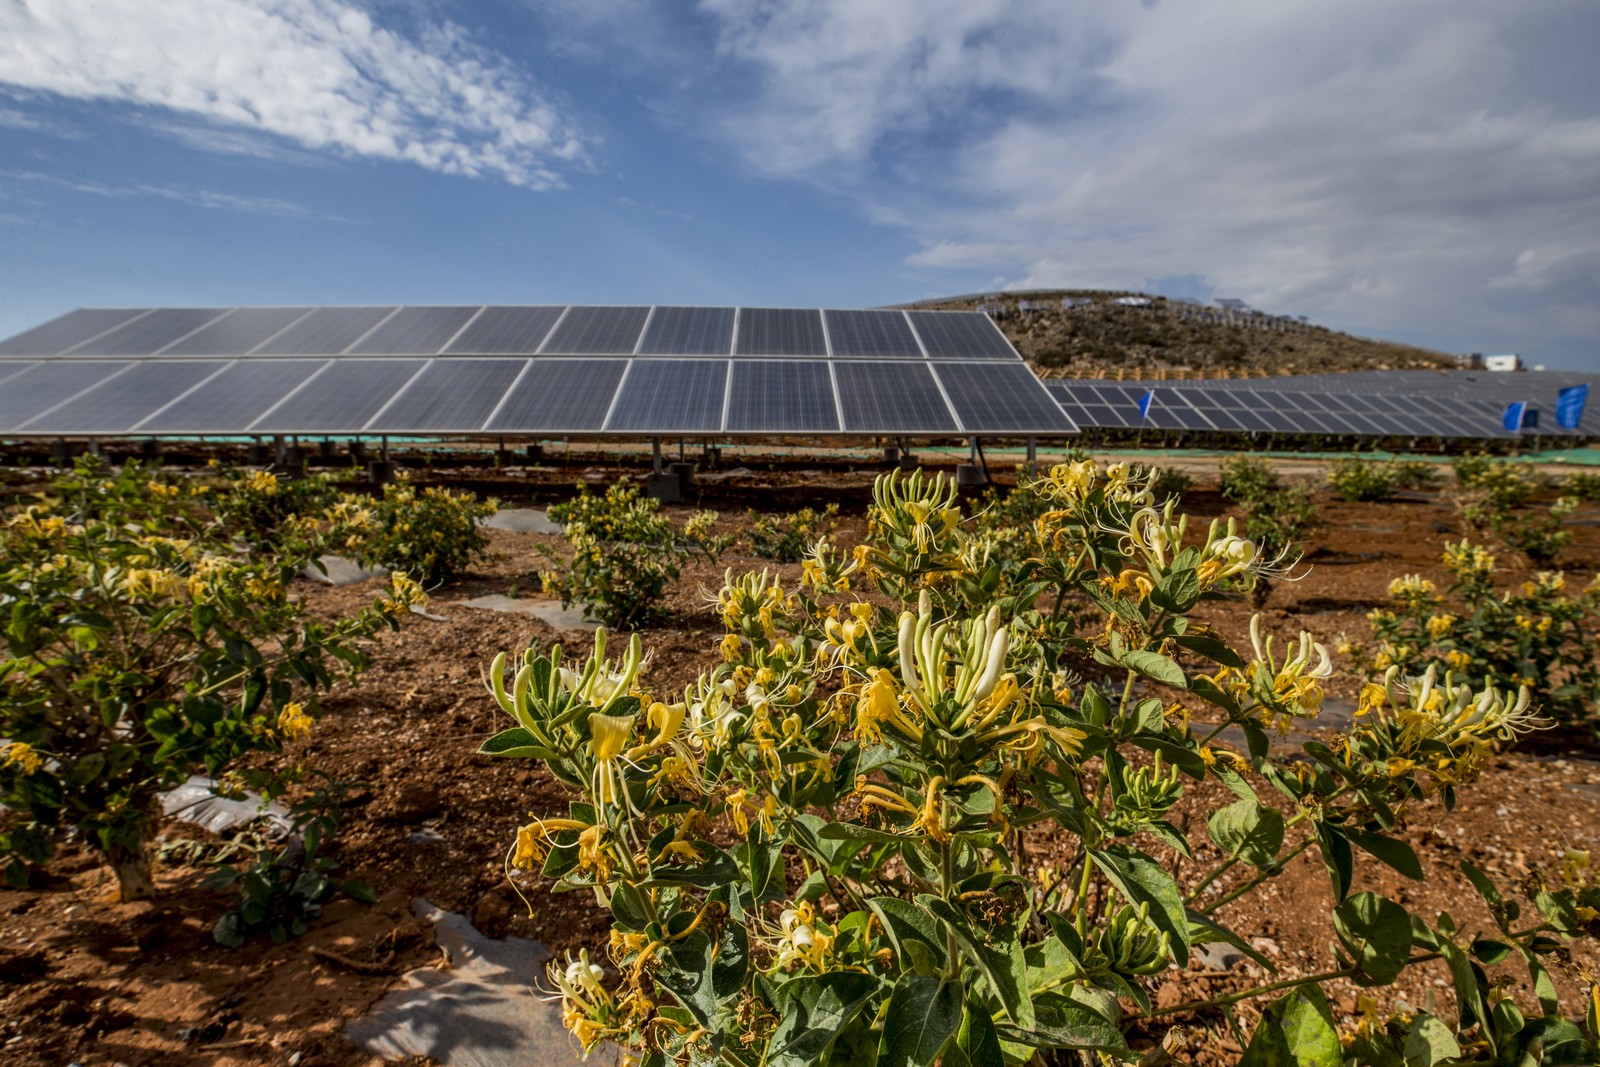 Seedlings of honeysuckle flowers have been planted across Xicun I Solar Power Station